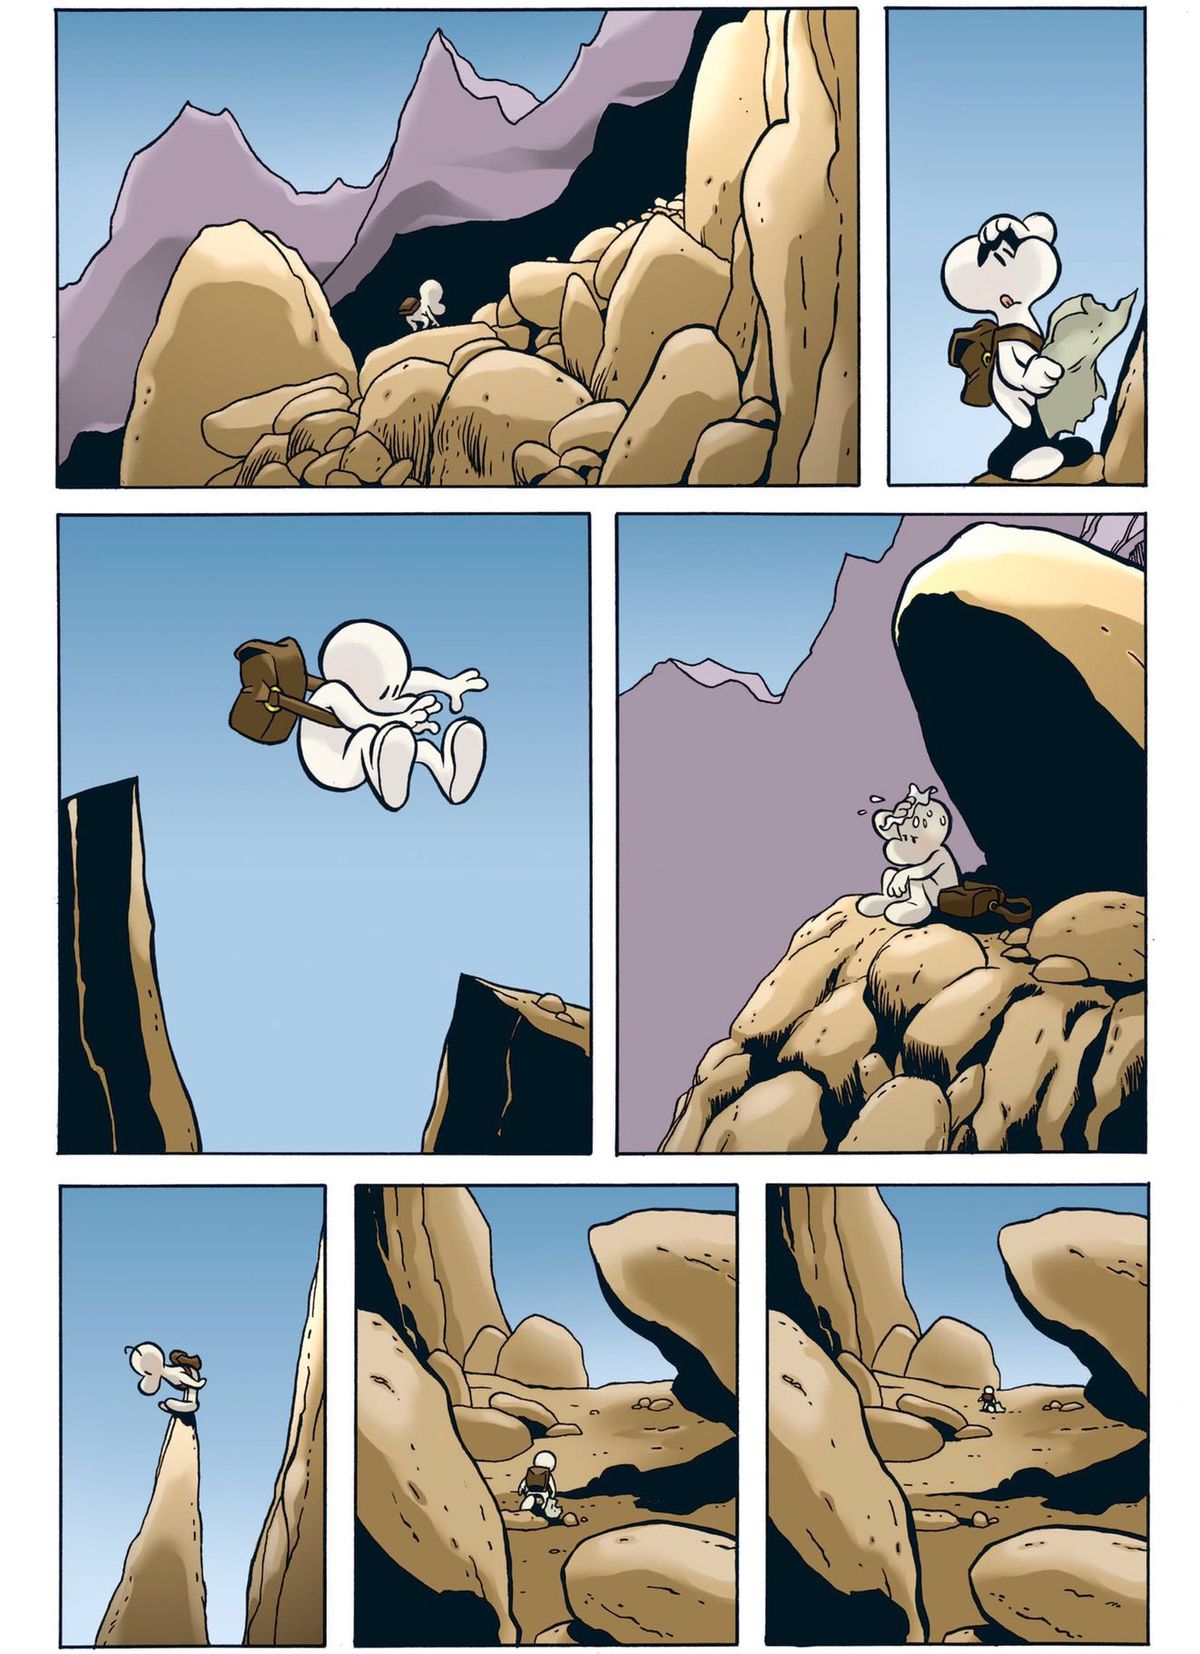 A montage of Fone Bone hiking through rocky landscape. He traipses over loose boulders, shields his eyes from the sun as he consults a map, leaps a gap, mops sweat from his forehead as he rests in the shade of a rock, stands on the top of an absurdly pointy spar looking down, and trudges slowly towards the horizon in Bone.